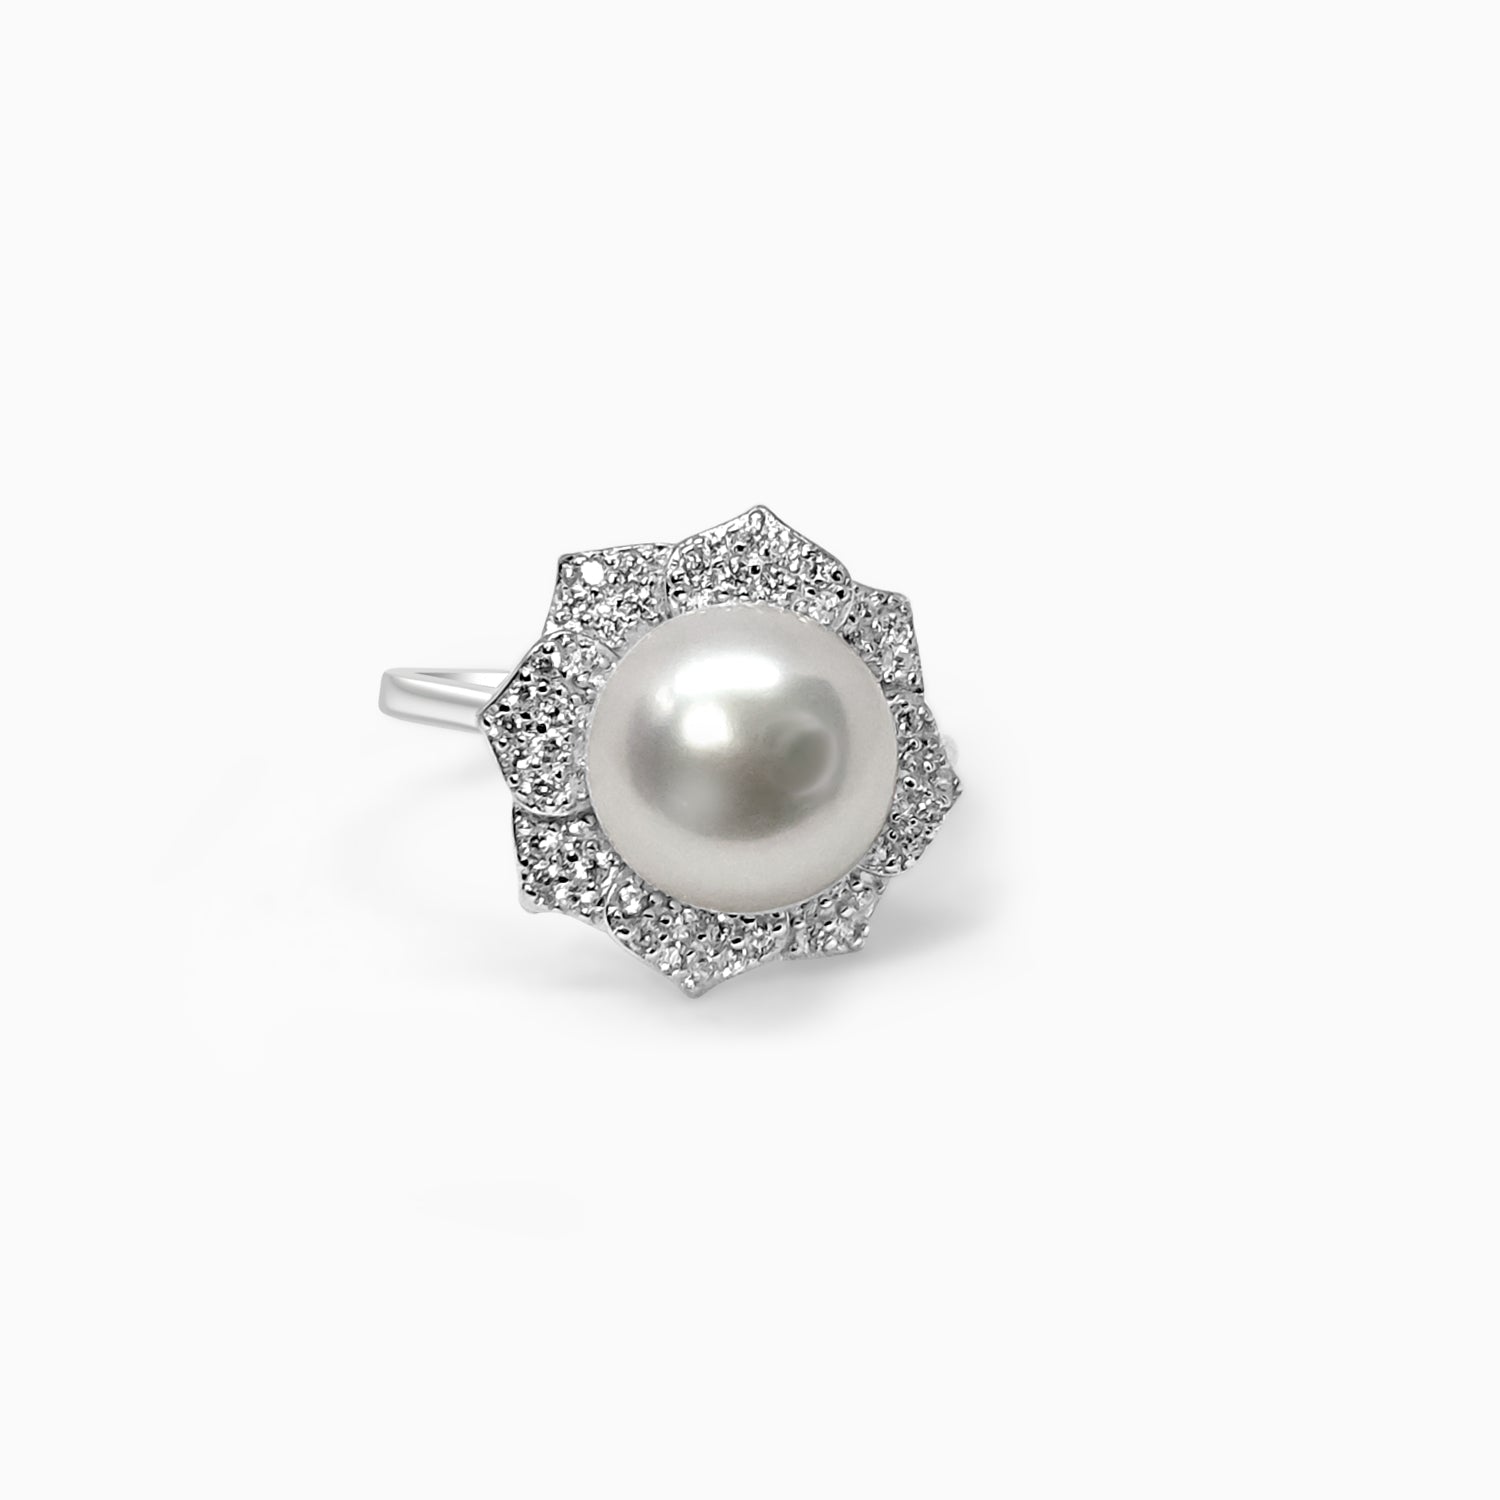 Silver Sparkling Periwinkle Pearl Flower Ring